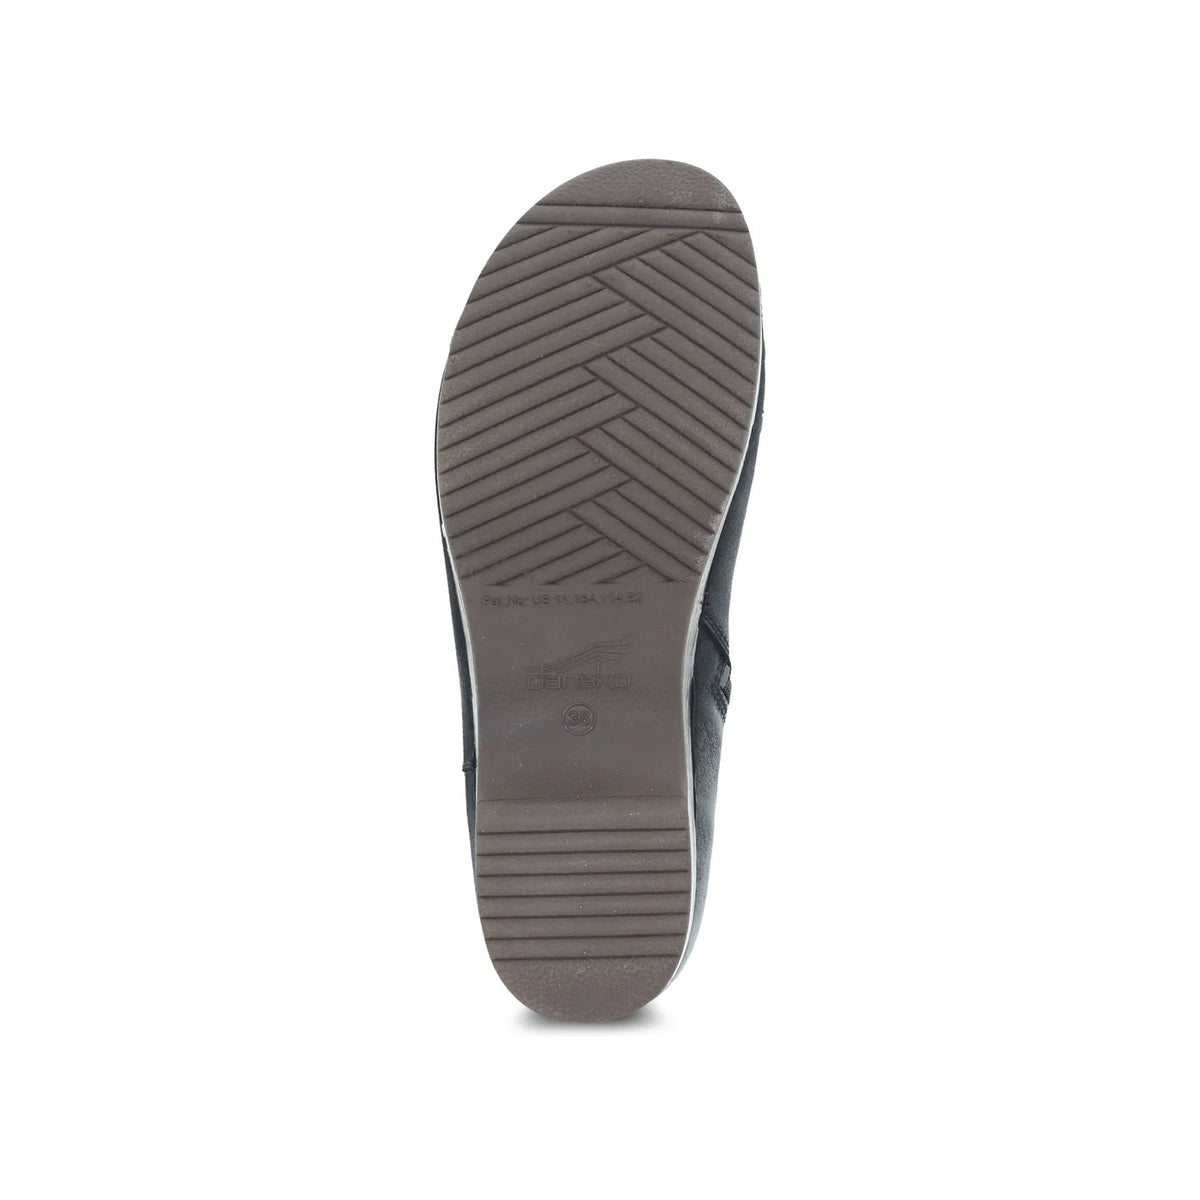 Bottom view of a single Dansko Brook Black Burnished - Womens ankle bootie showing a herringbone tread pattern on its outsole with visible brand details.